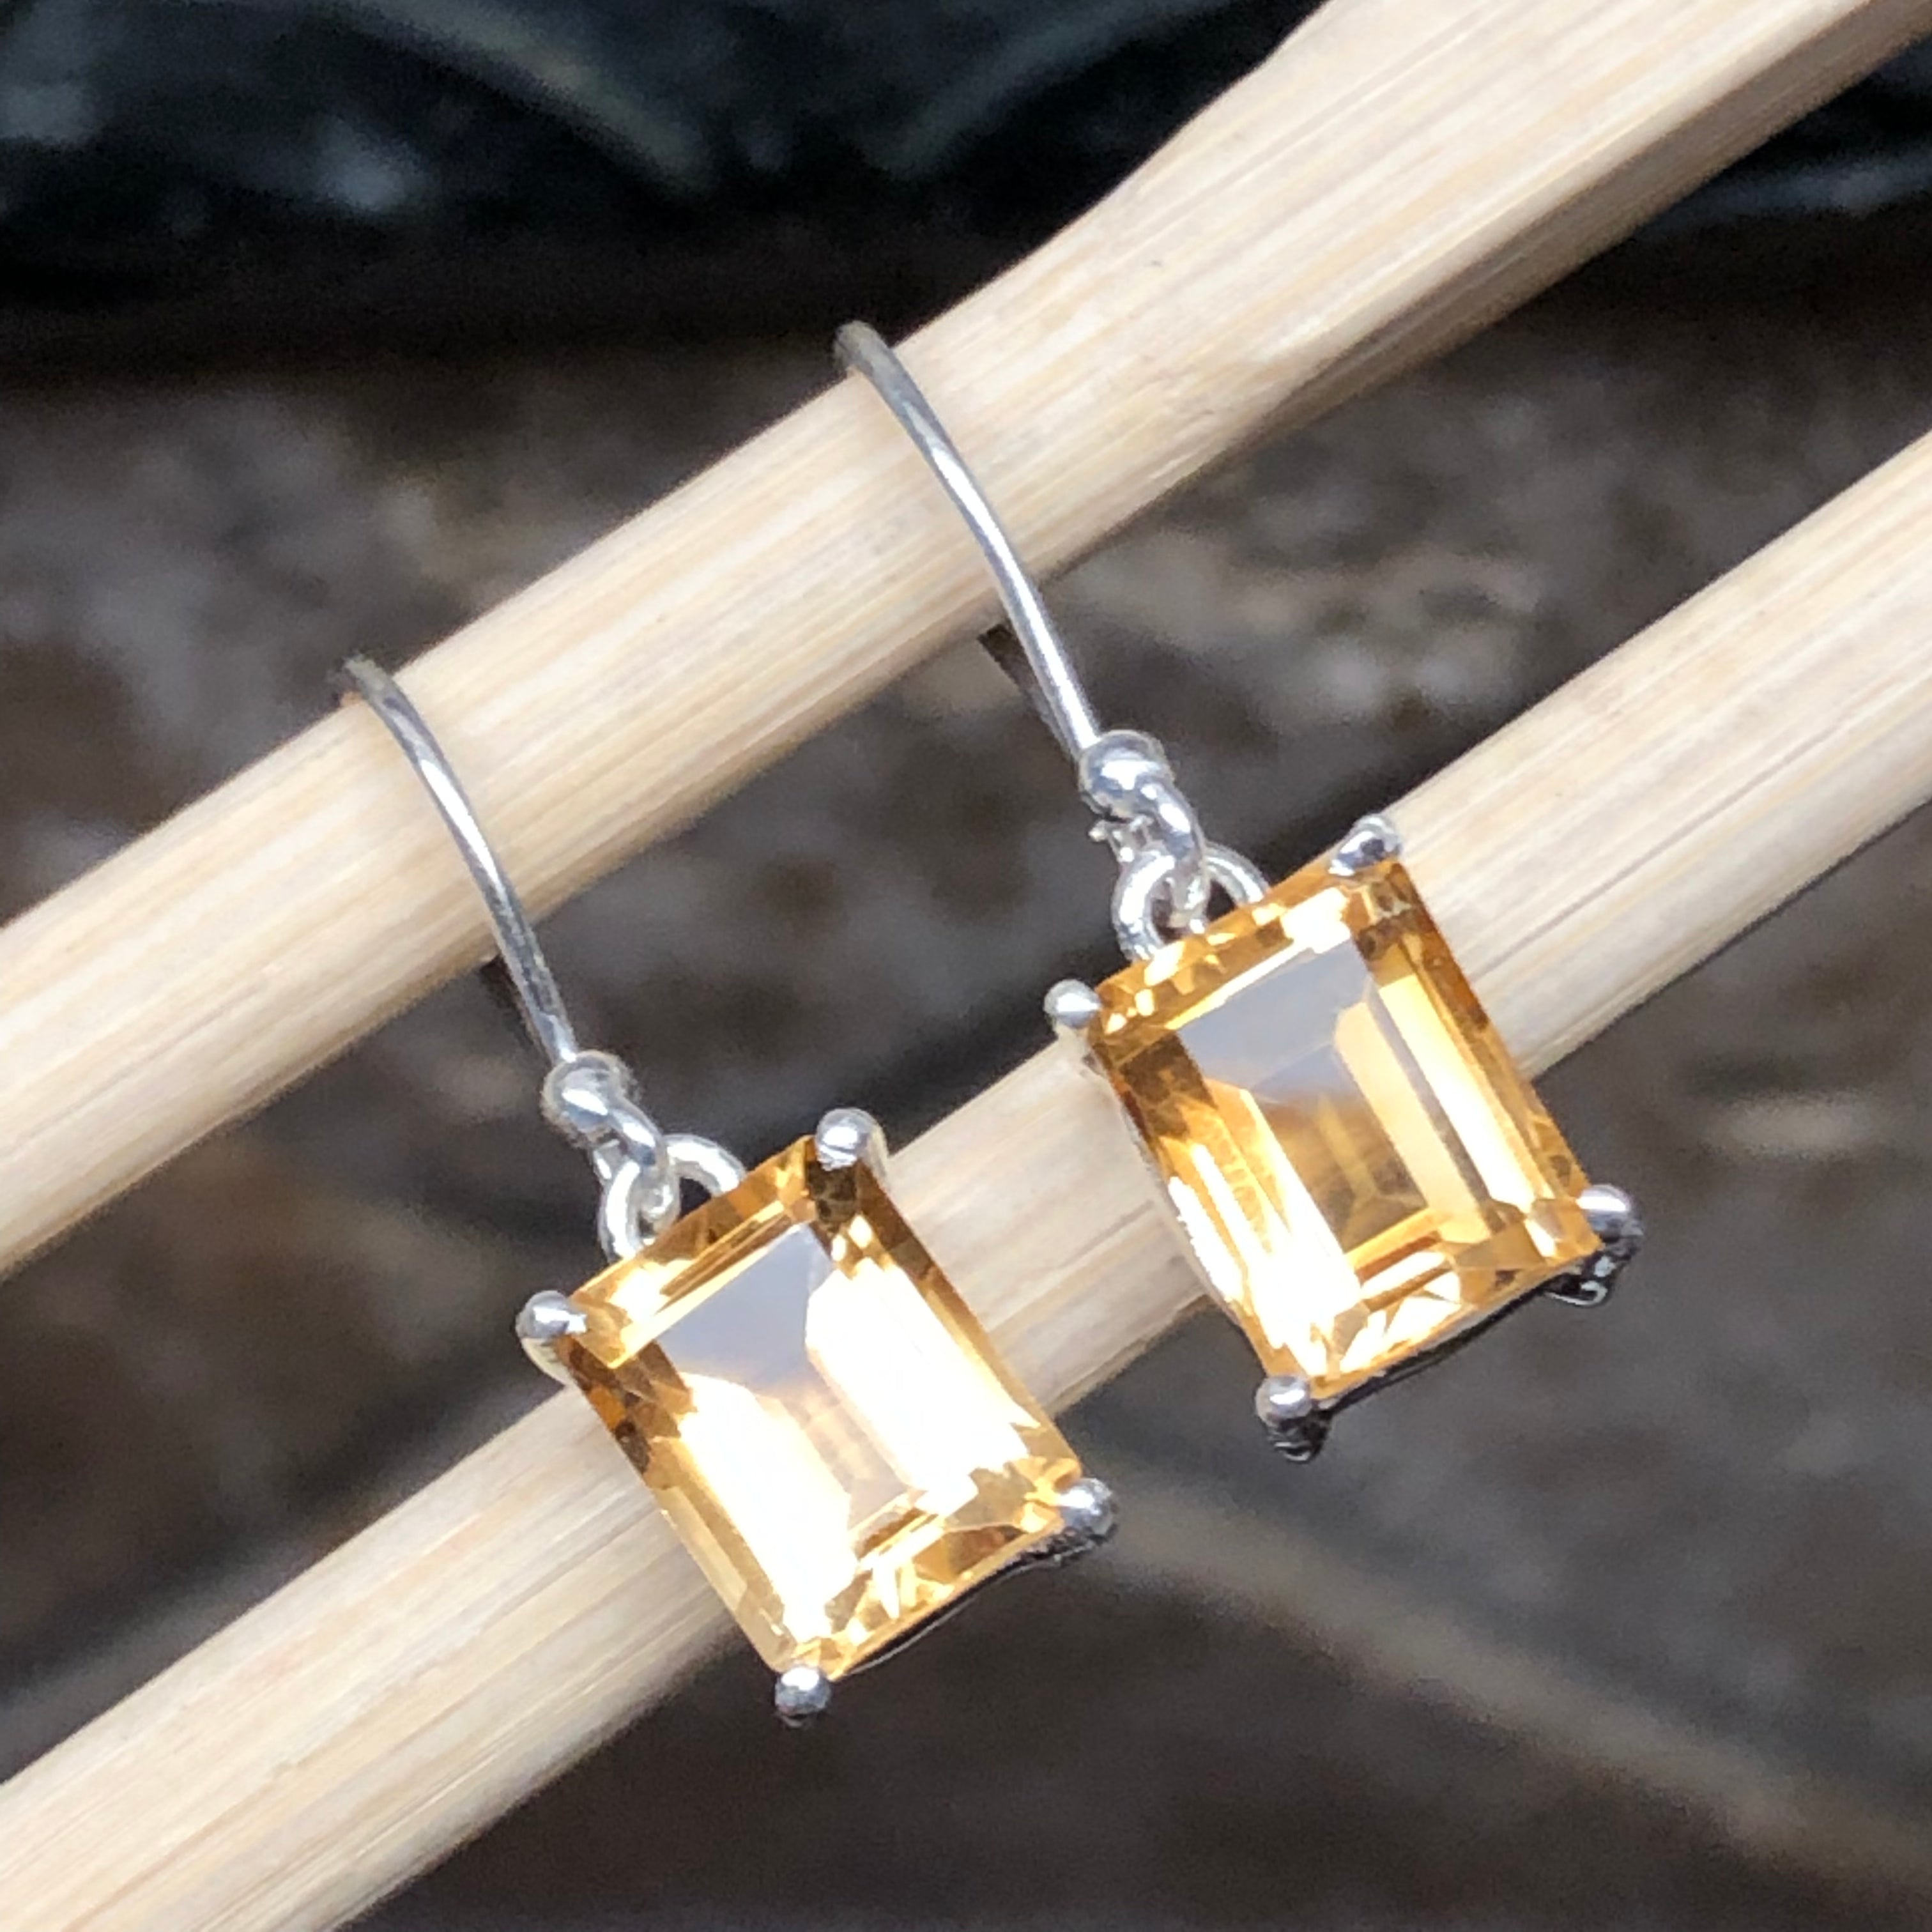 Natural 2.5ct Golden Citrine 925 Solid Sterling Silver Earrings 25mm - Natural Rocks by Kala